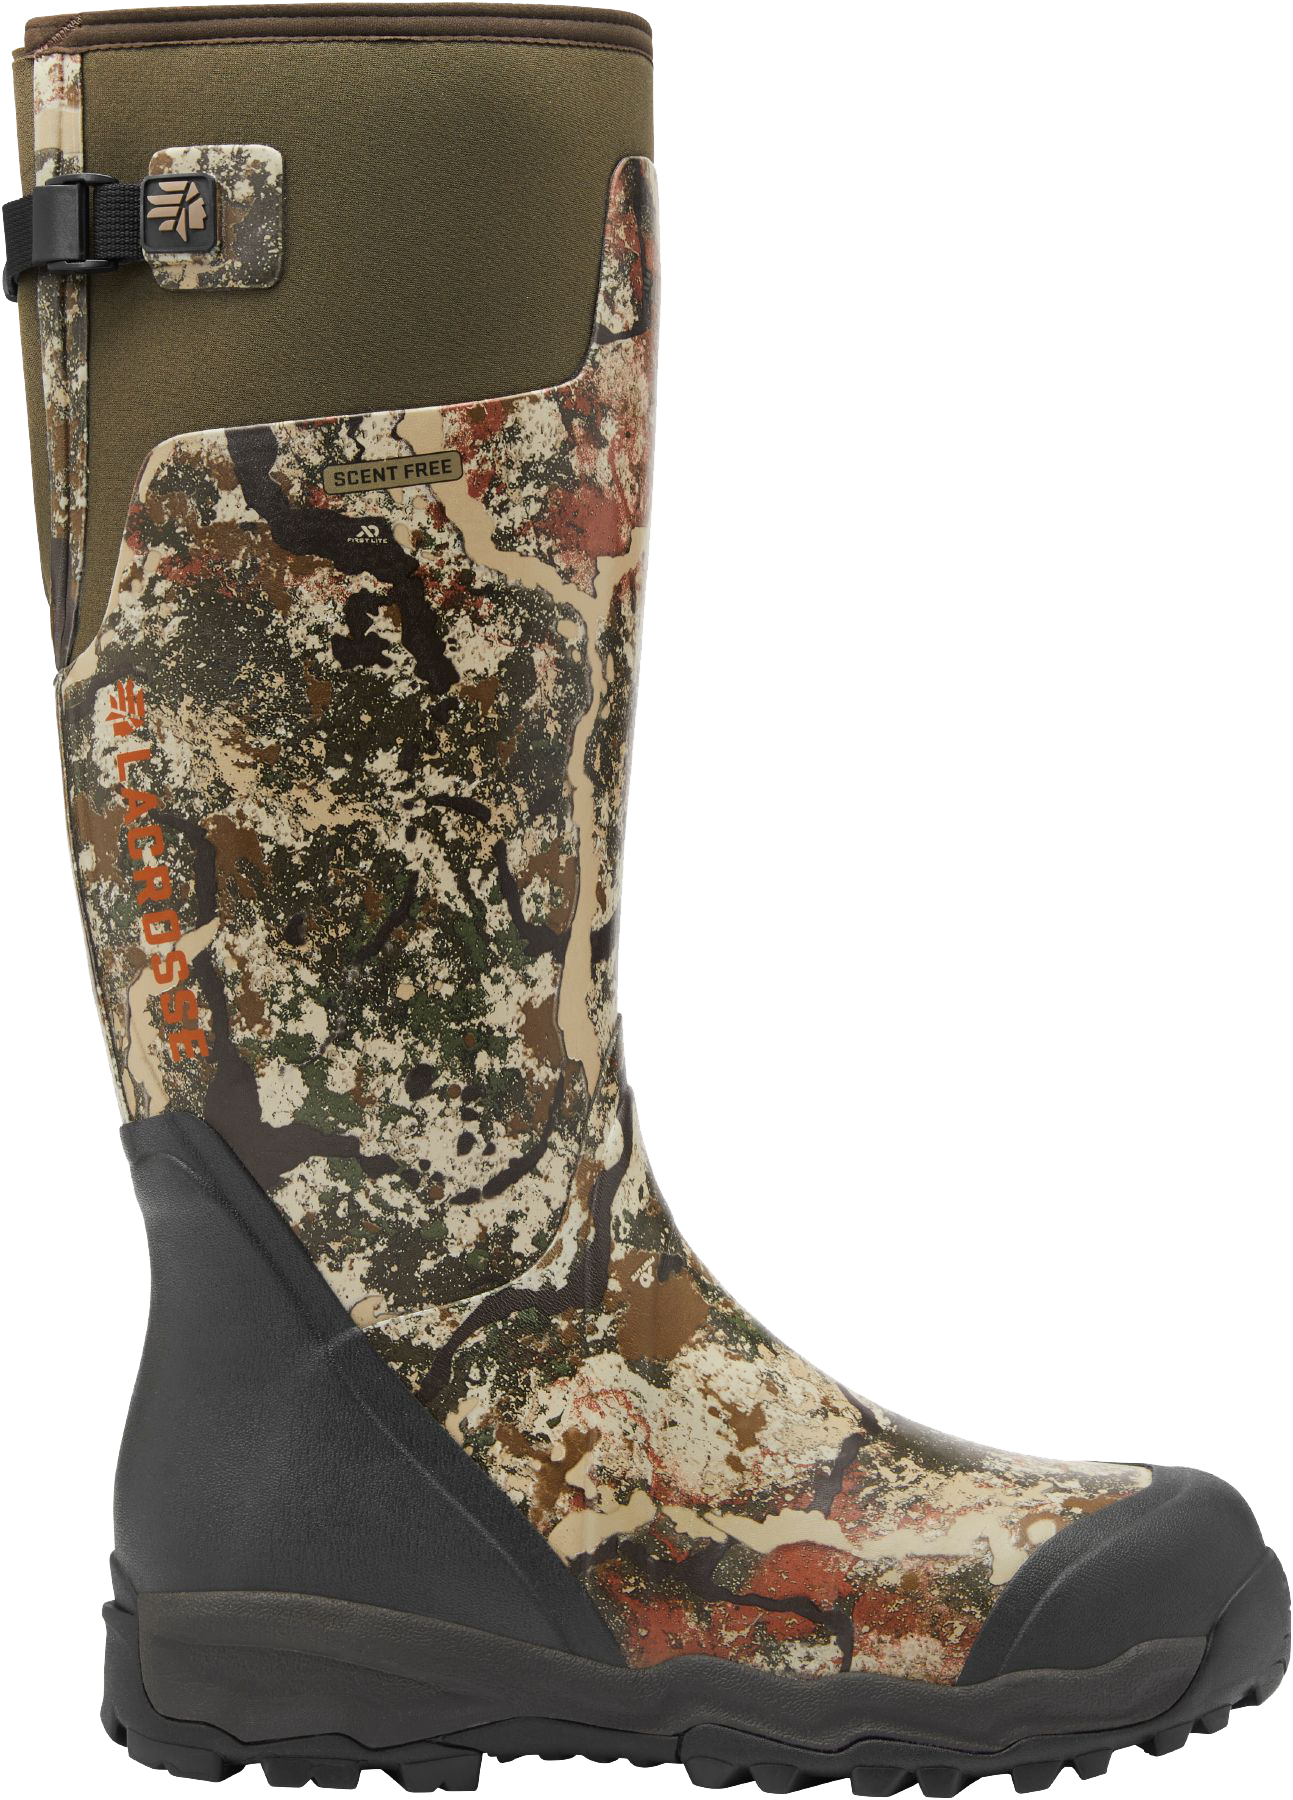 LaCrosse AlphaBurly Pro Hunting Boots for Men - First Lite Specter - 12M